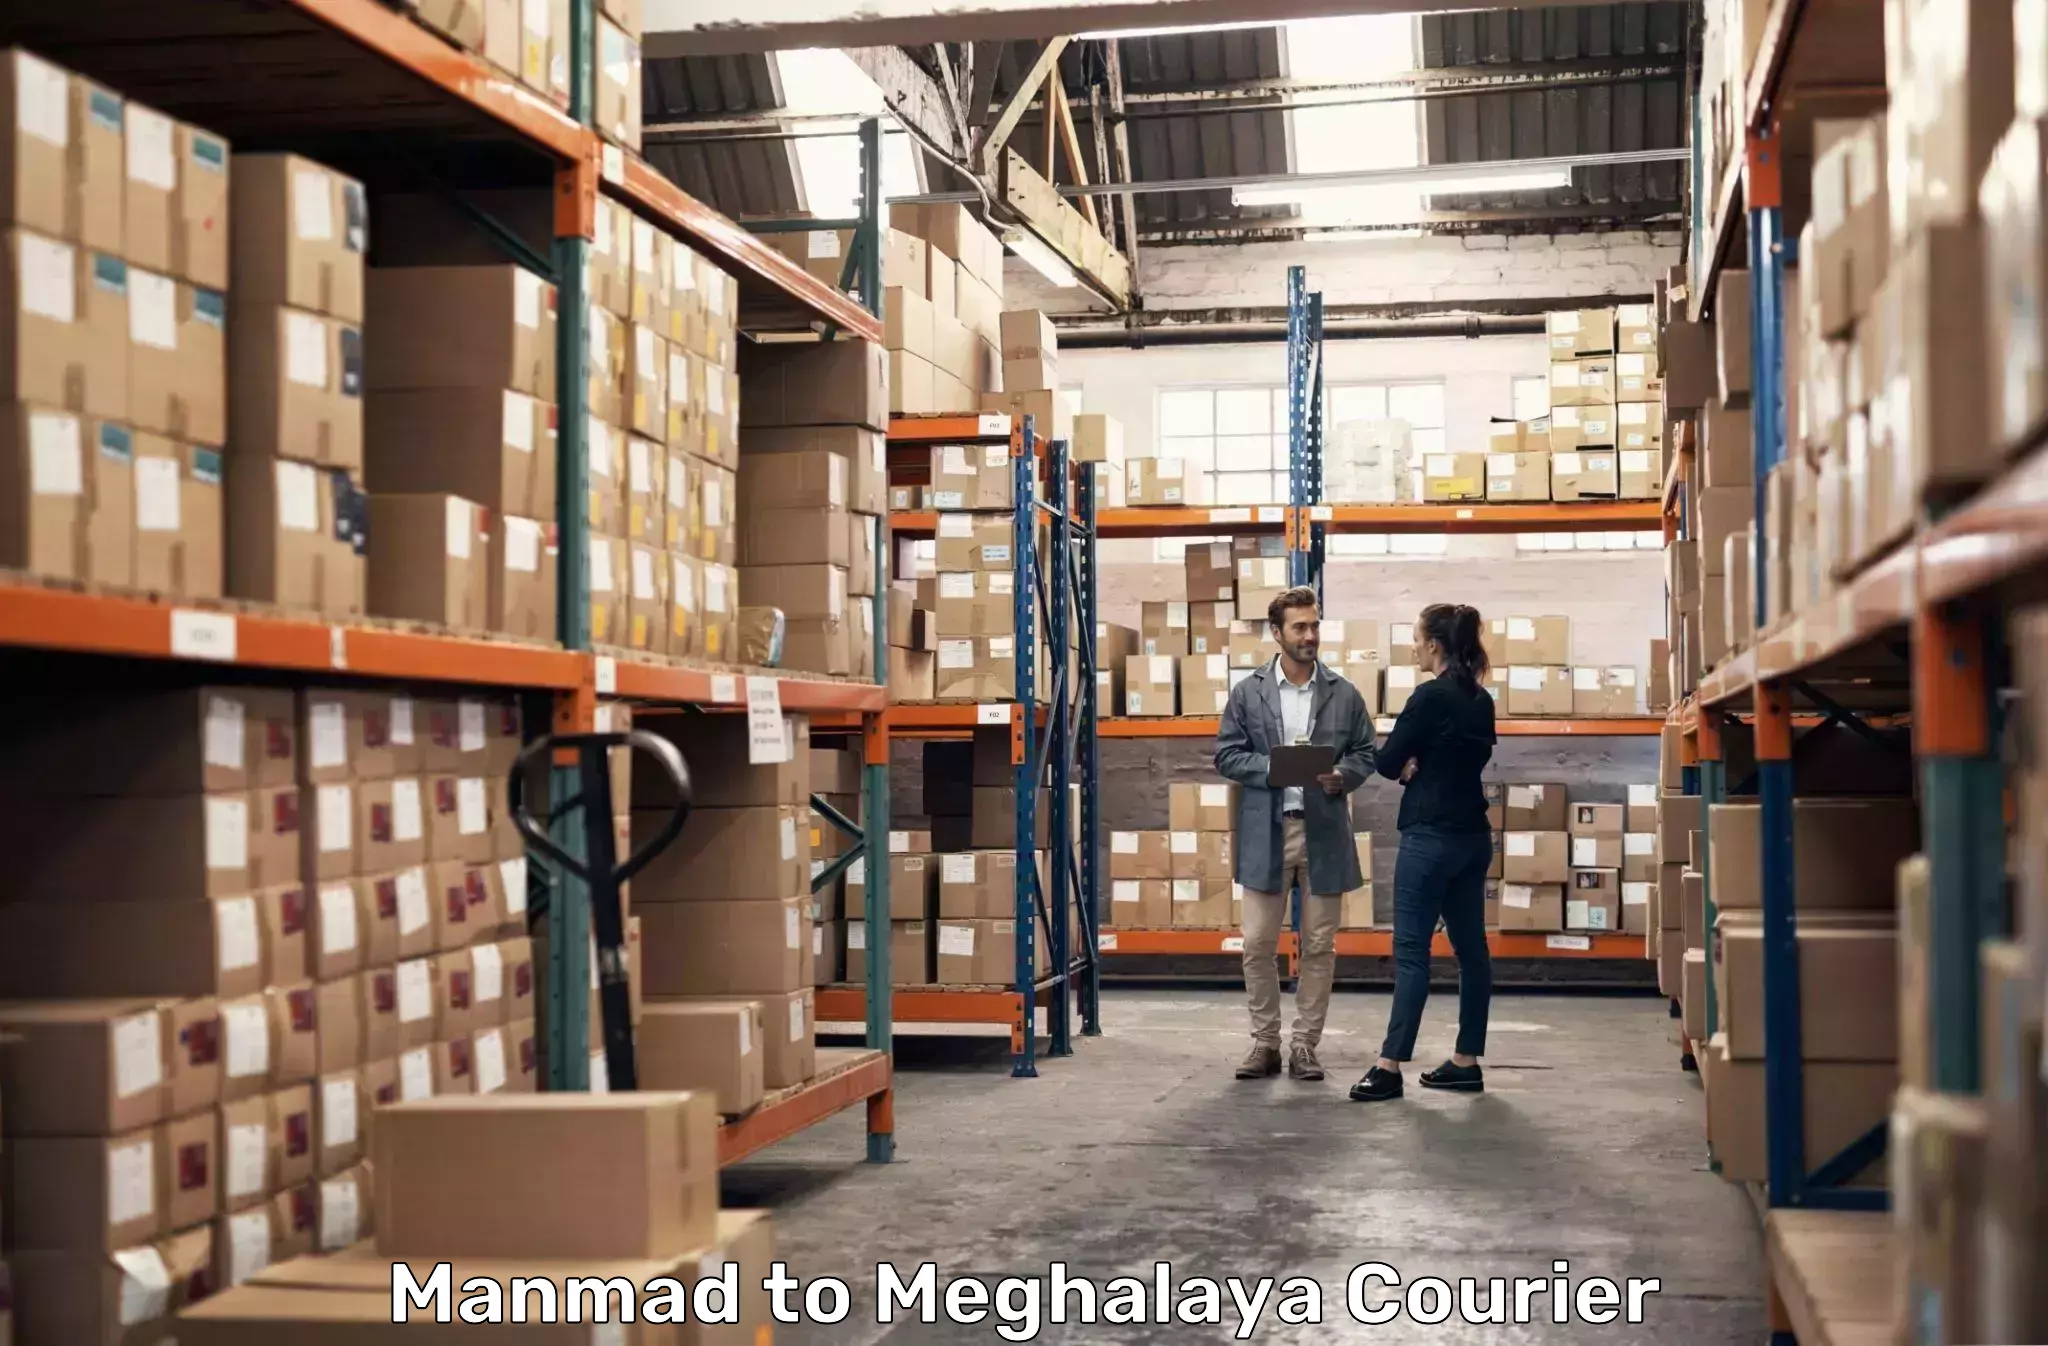 Subscription-based courier Manmad to Umsaw